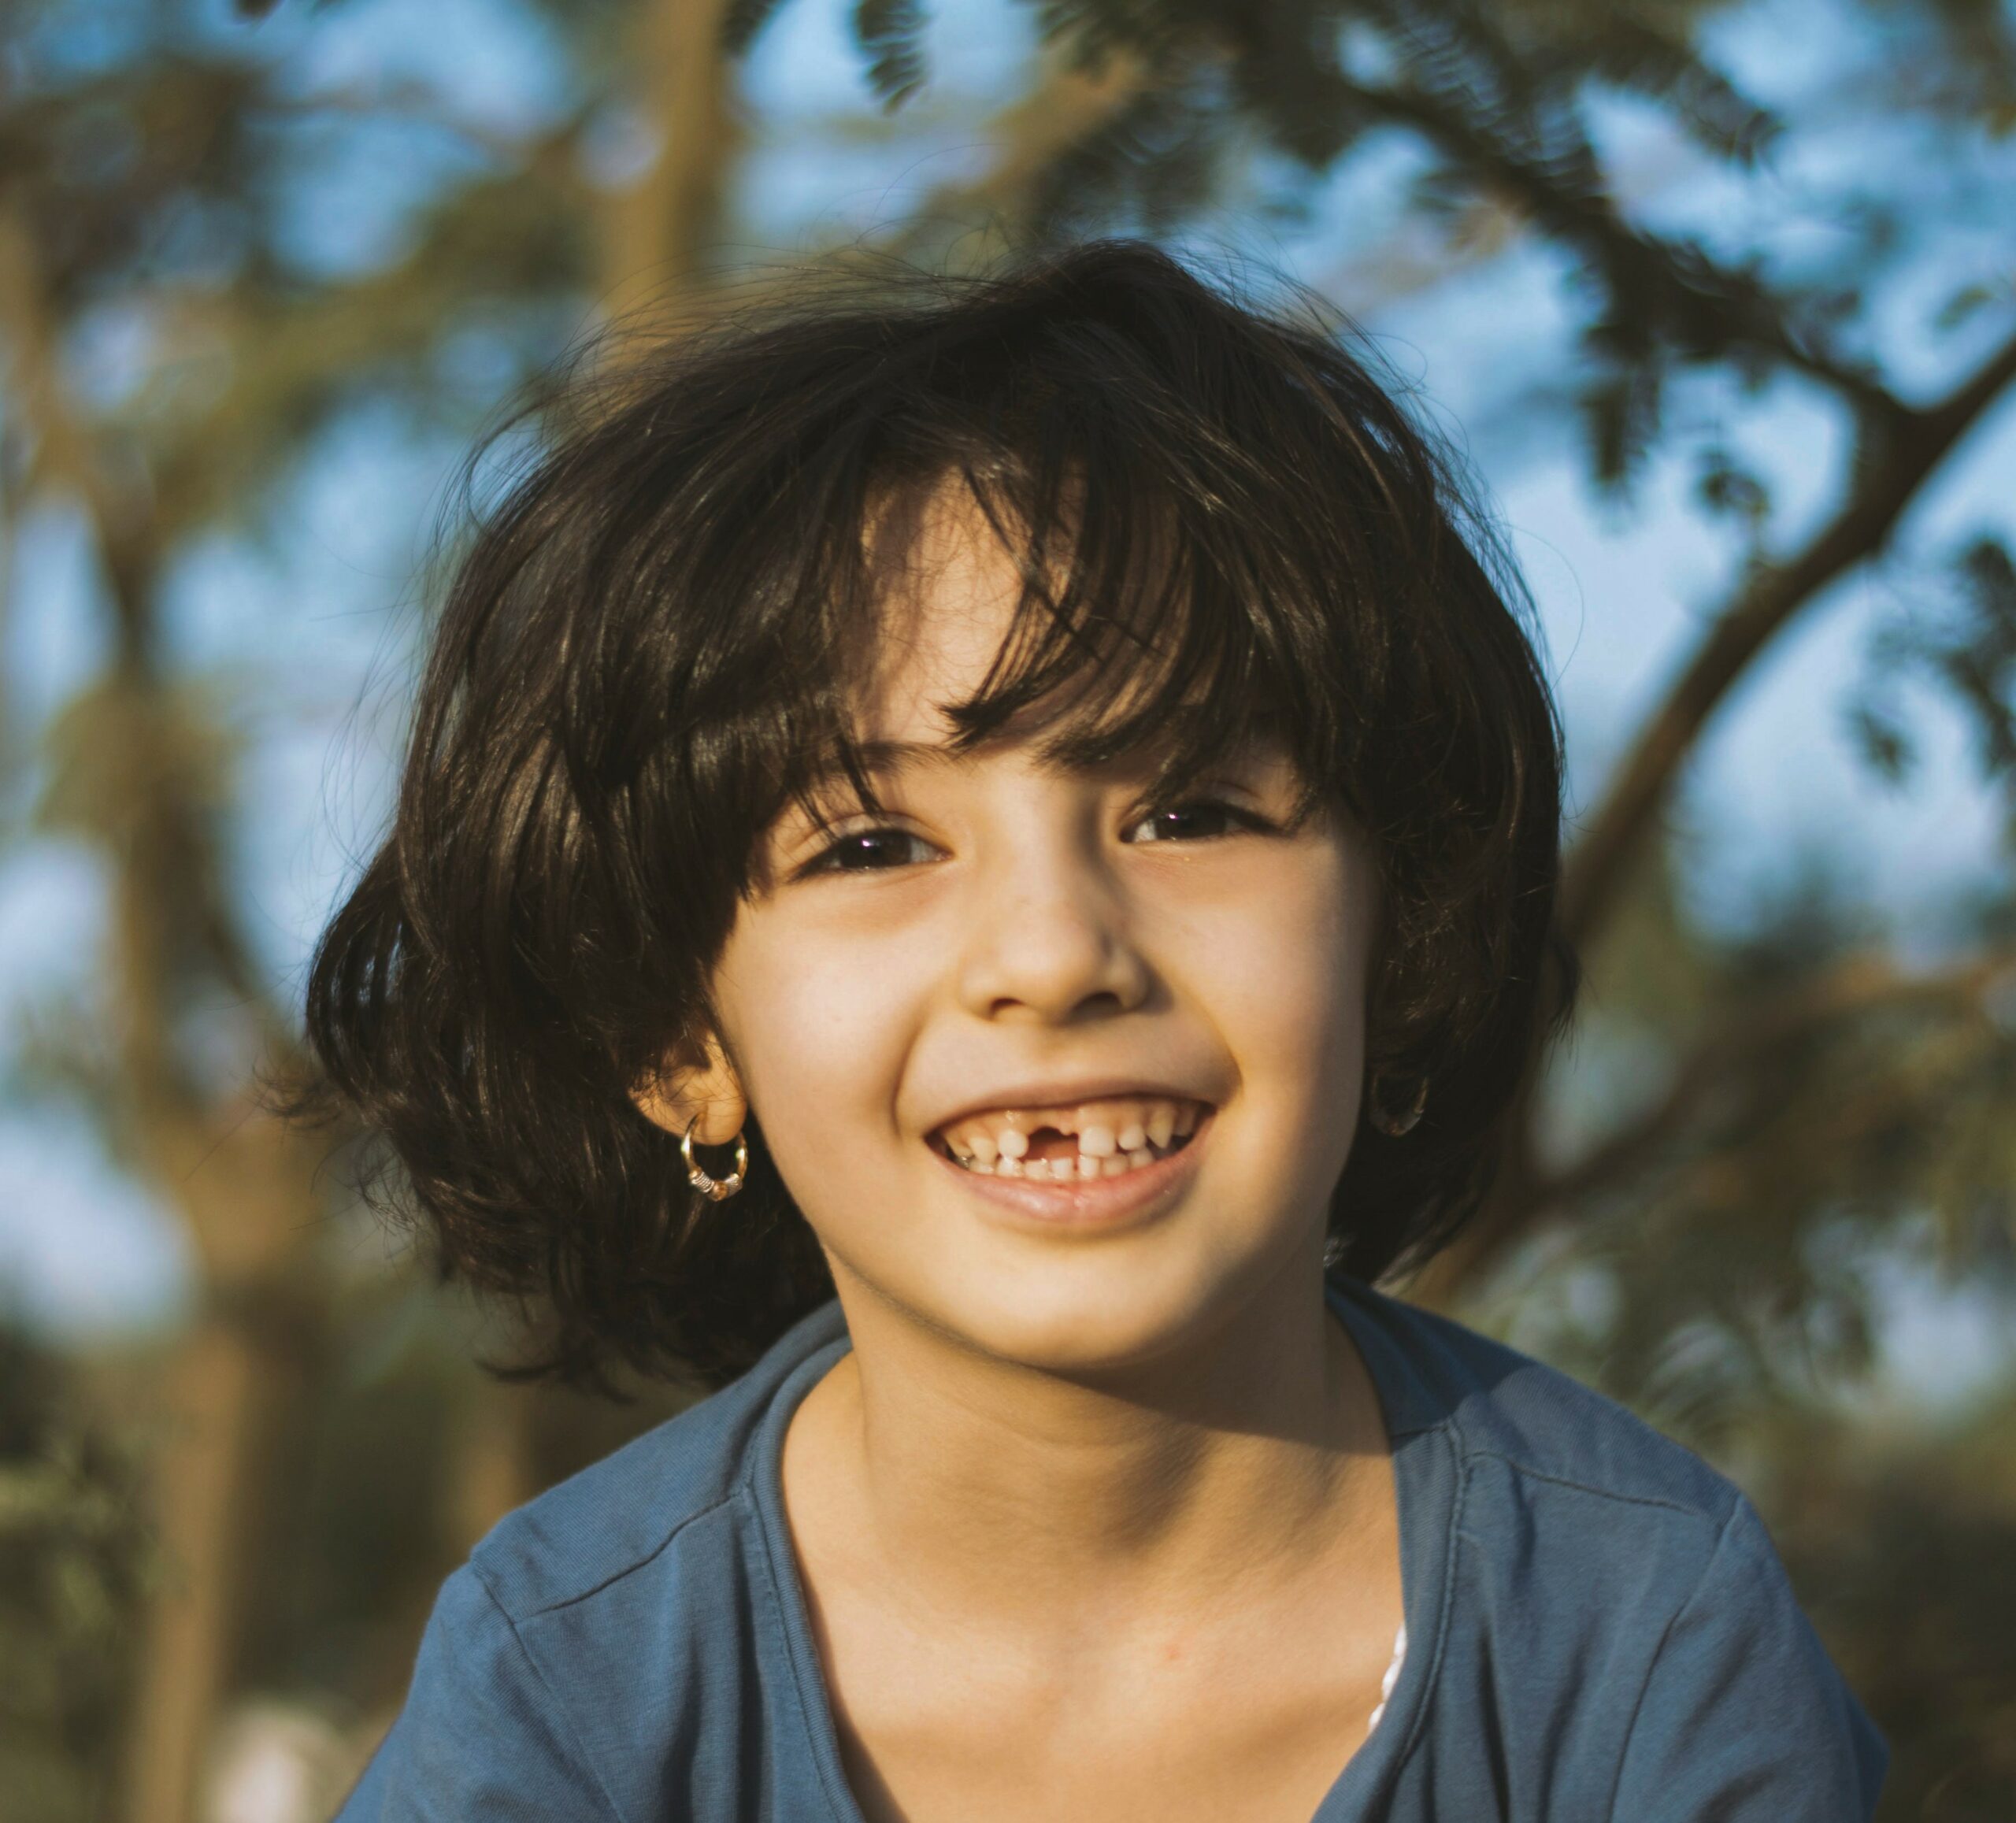 Child with missing tooth